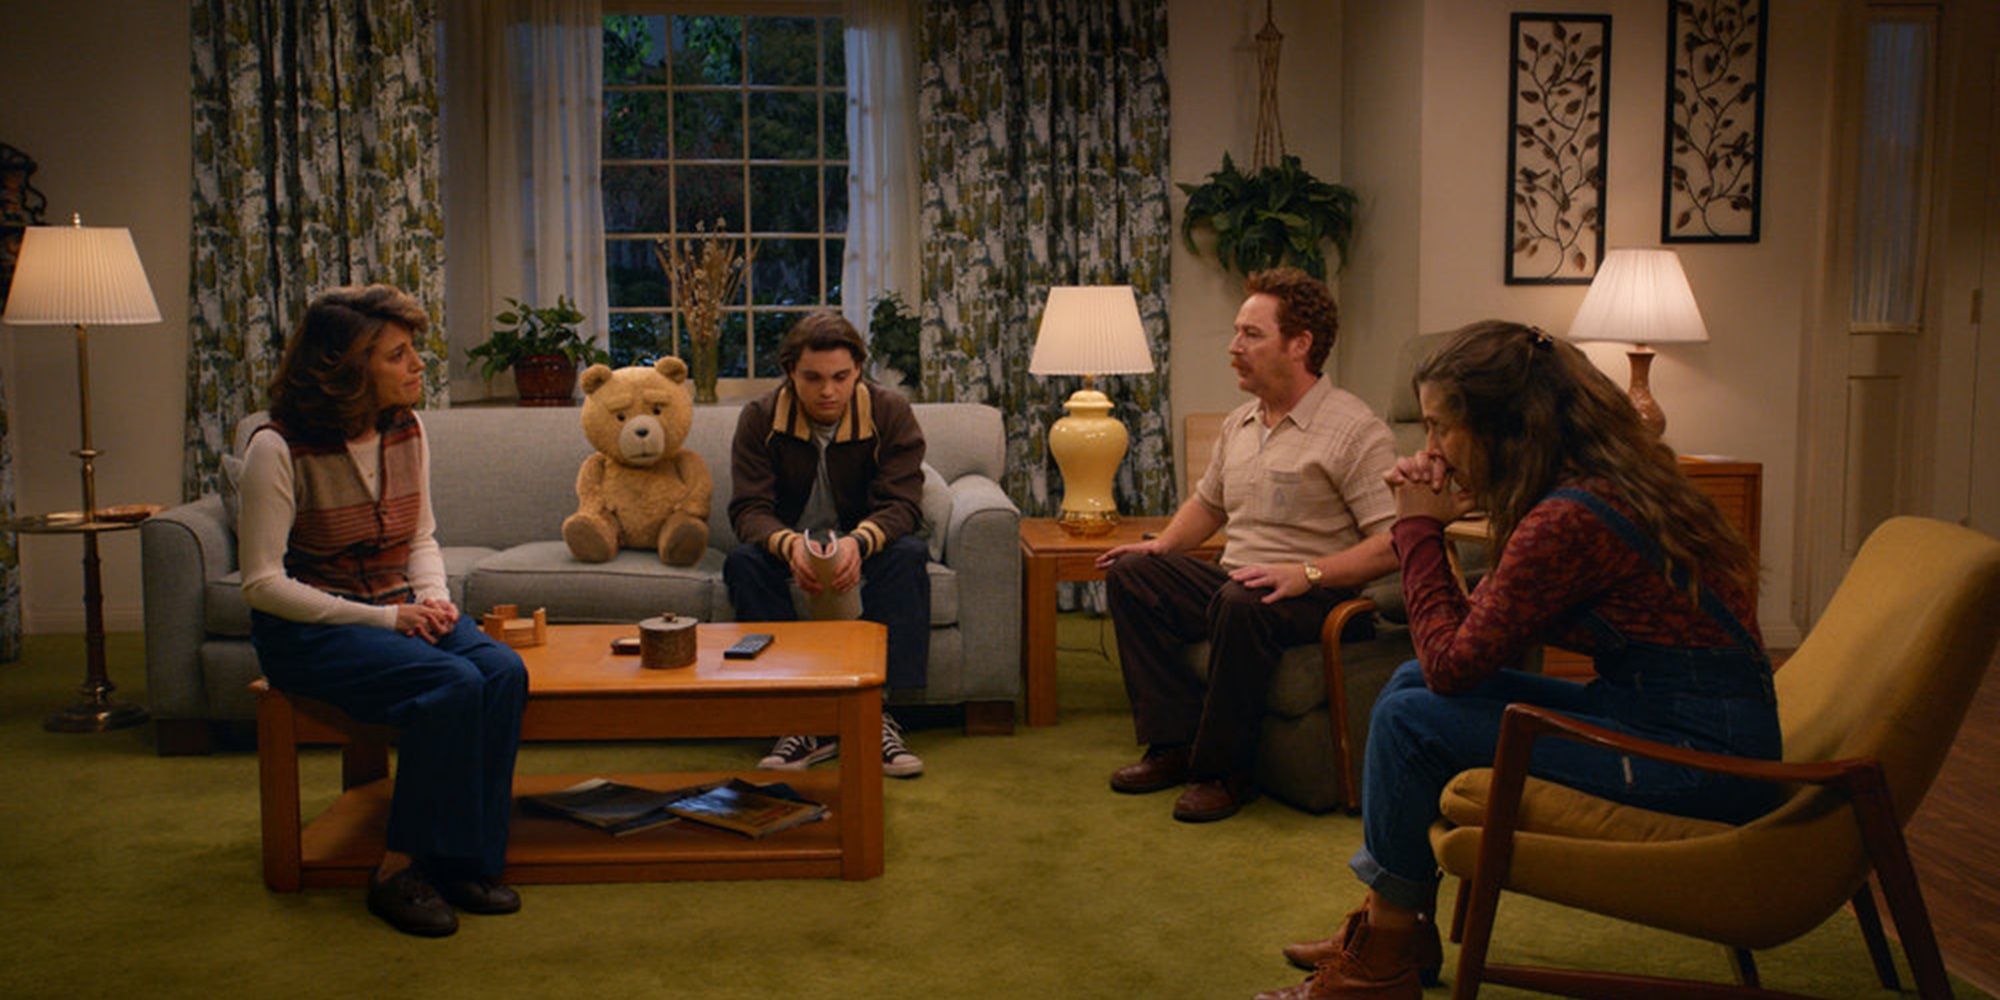 Matty confesses his secret to the family in Ted